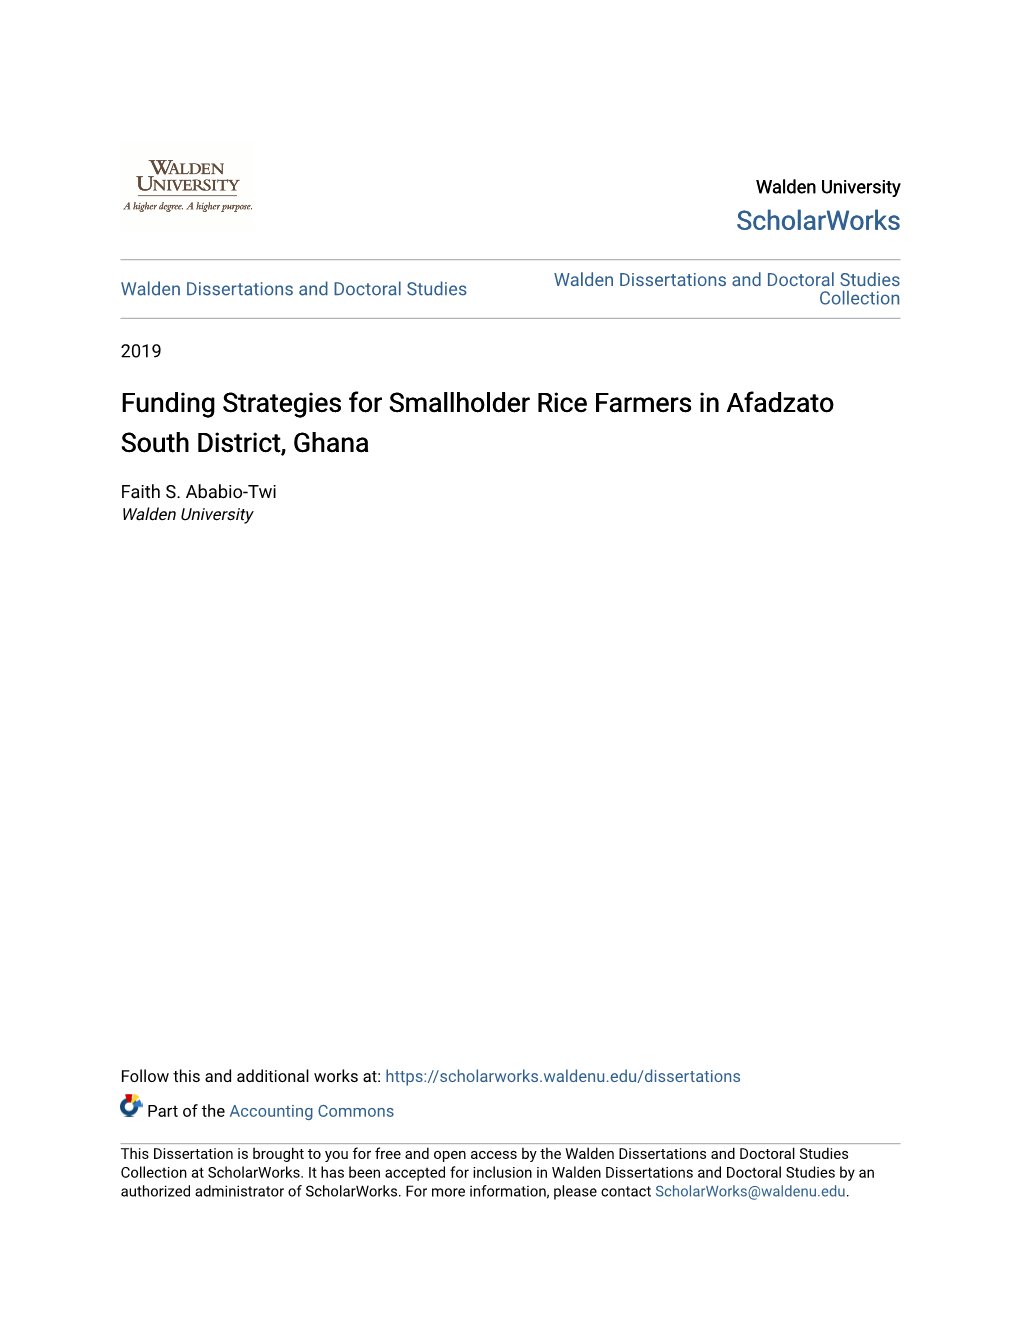 Funding Strategies for Smallholder Rice Farmers in Afadzato South District, Ghana